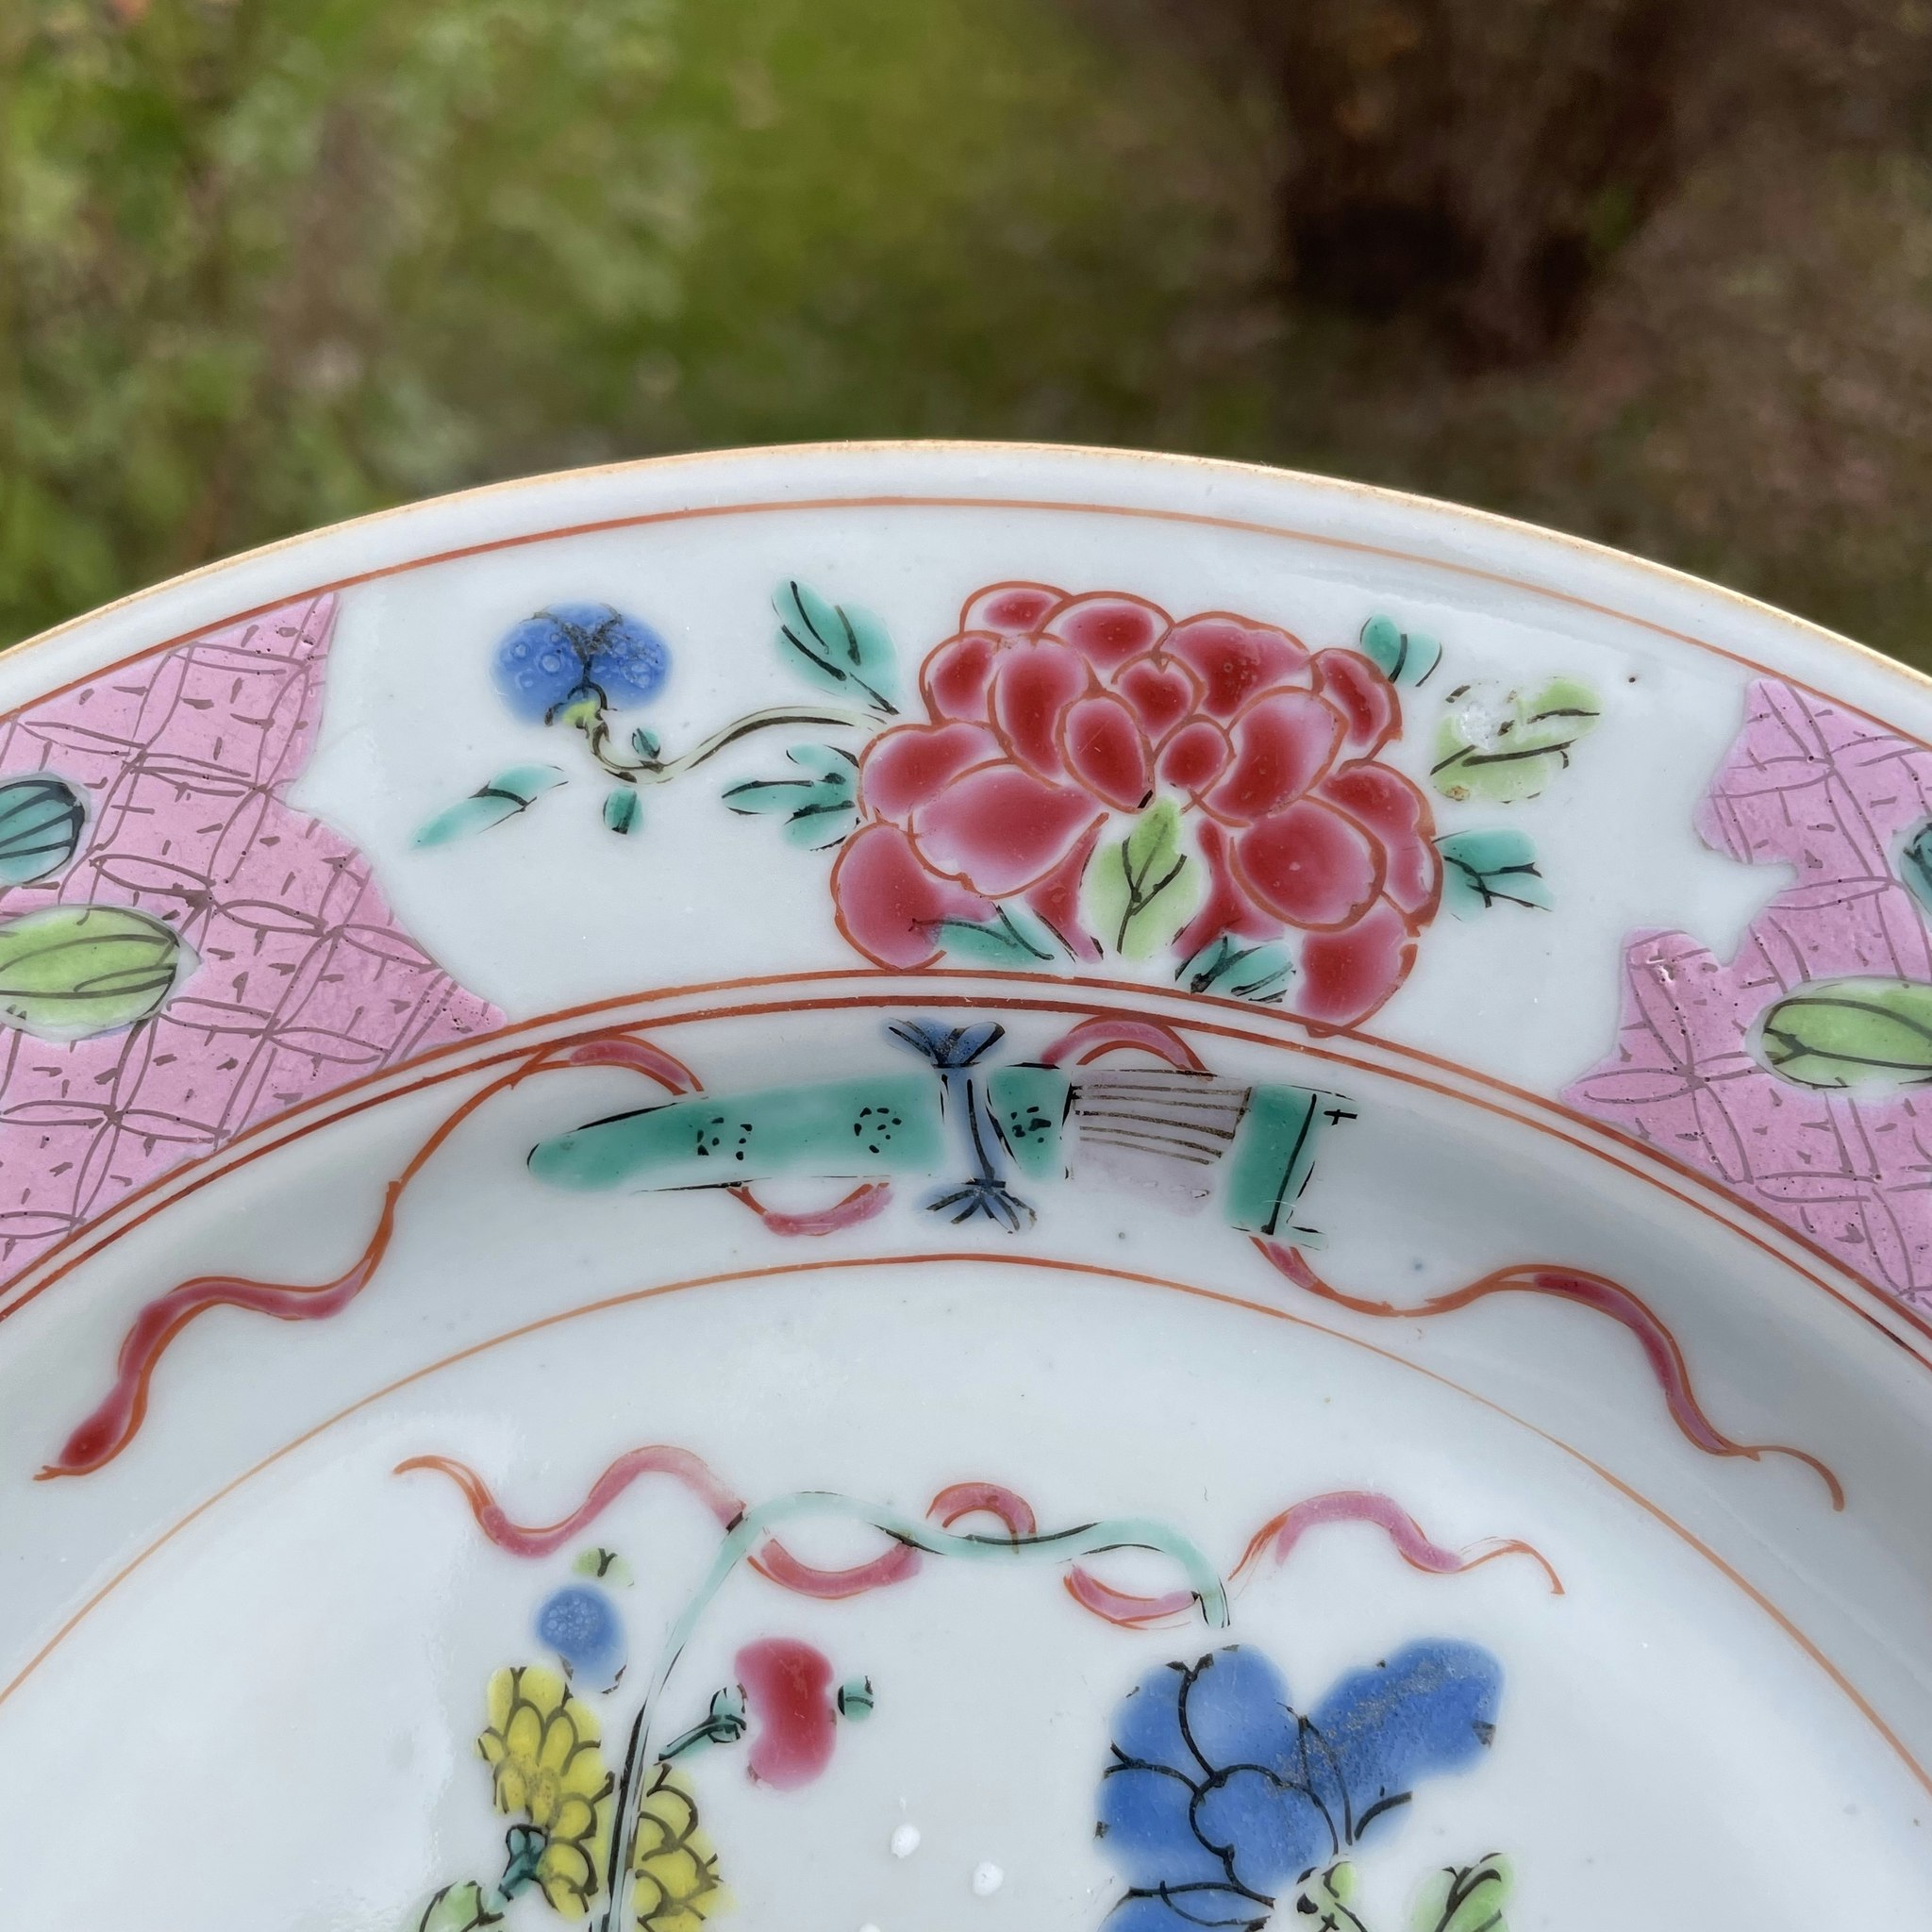 Chinese Antique porcelain plate first half of 18th C Yongzheng #1726